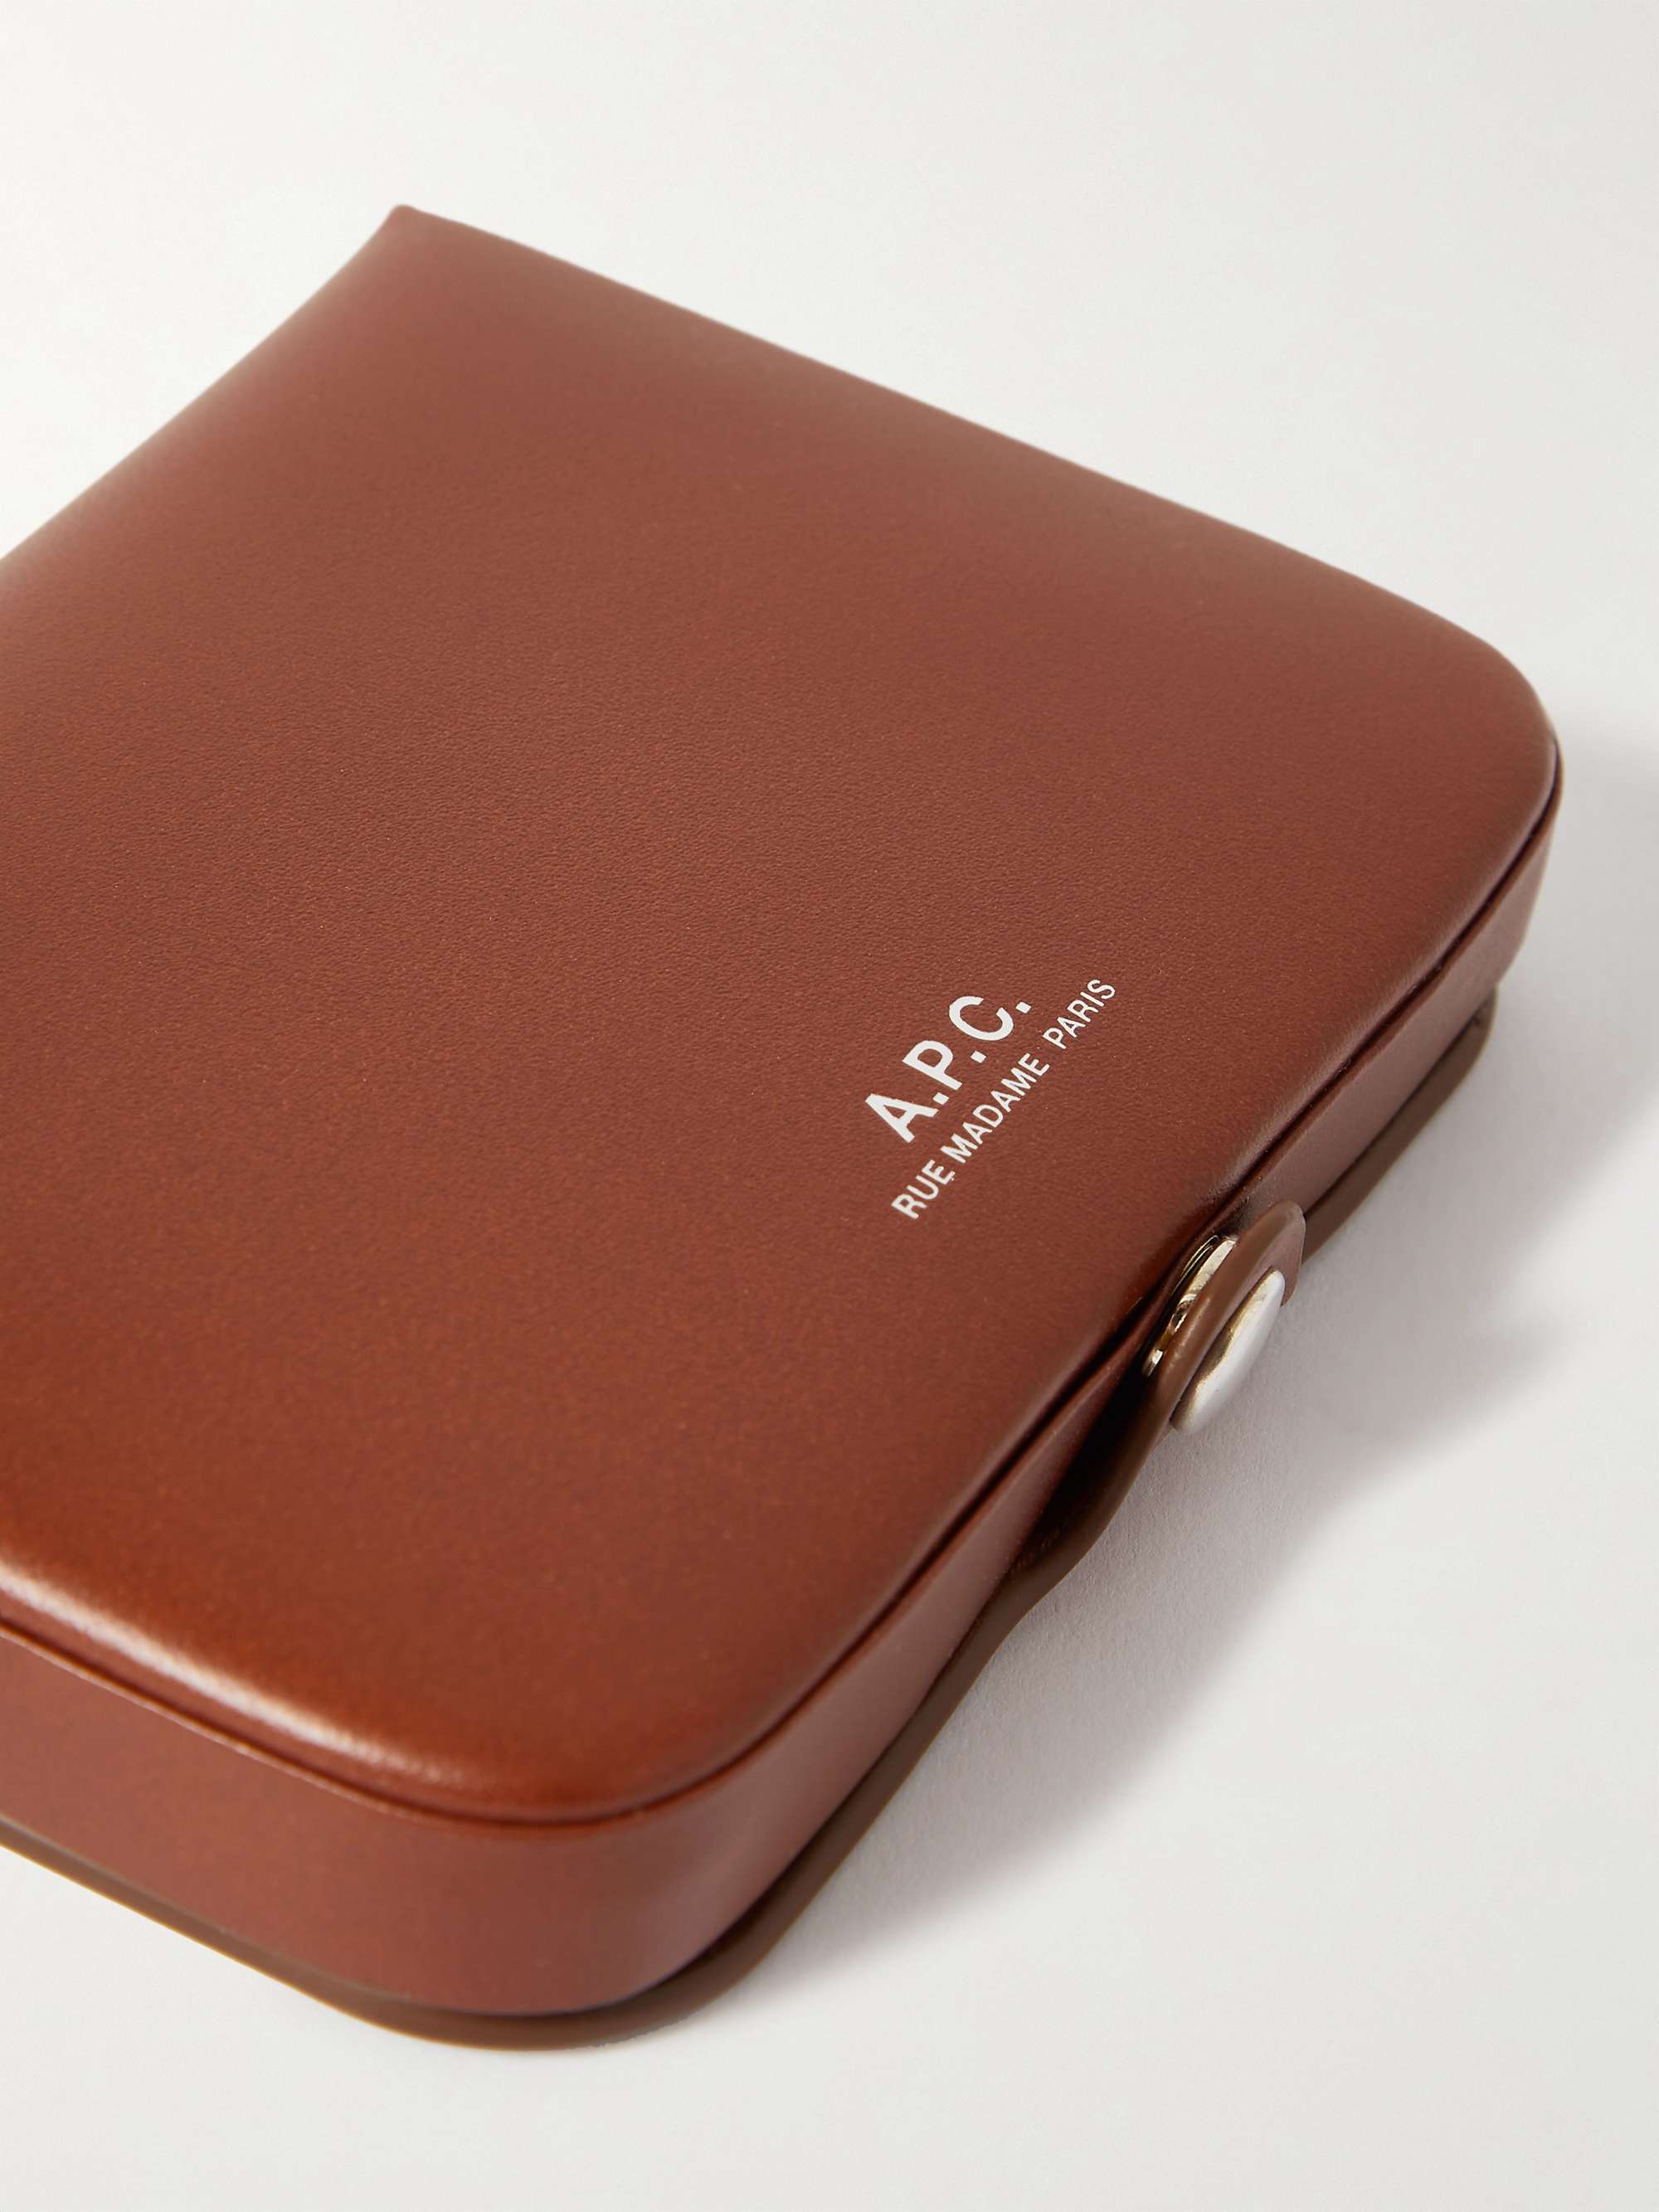 A.P.C. Josh Leather Coin and Cardholder